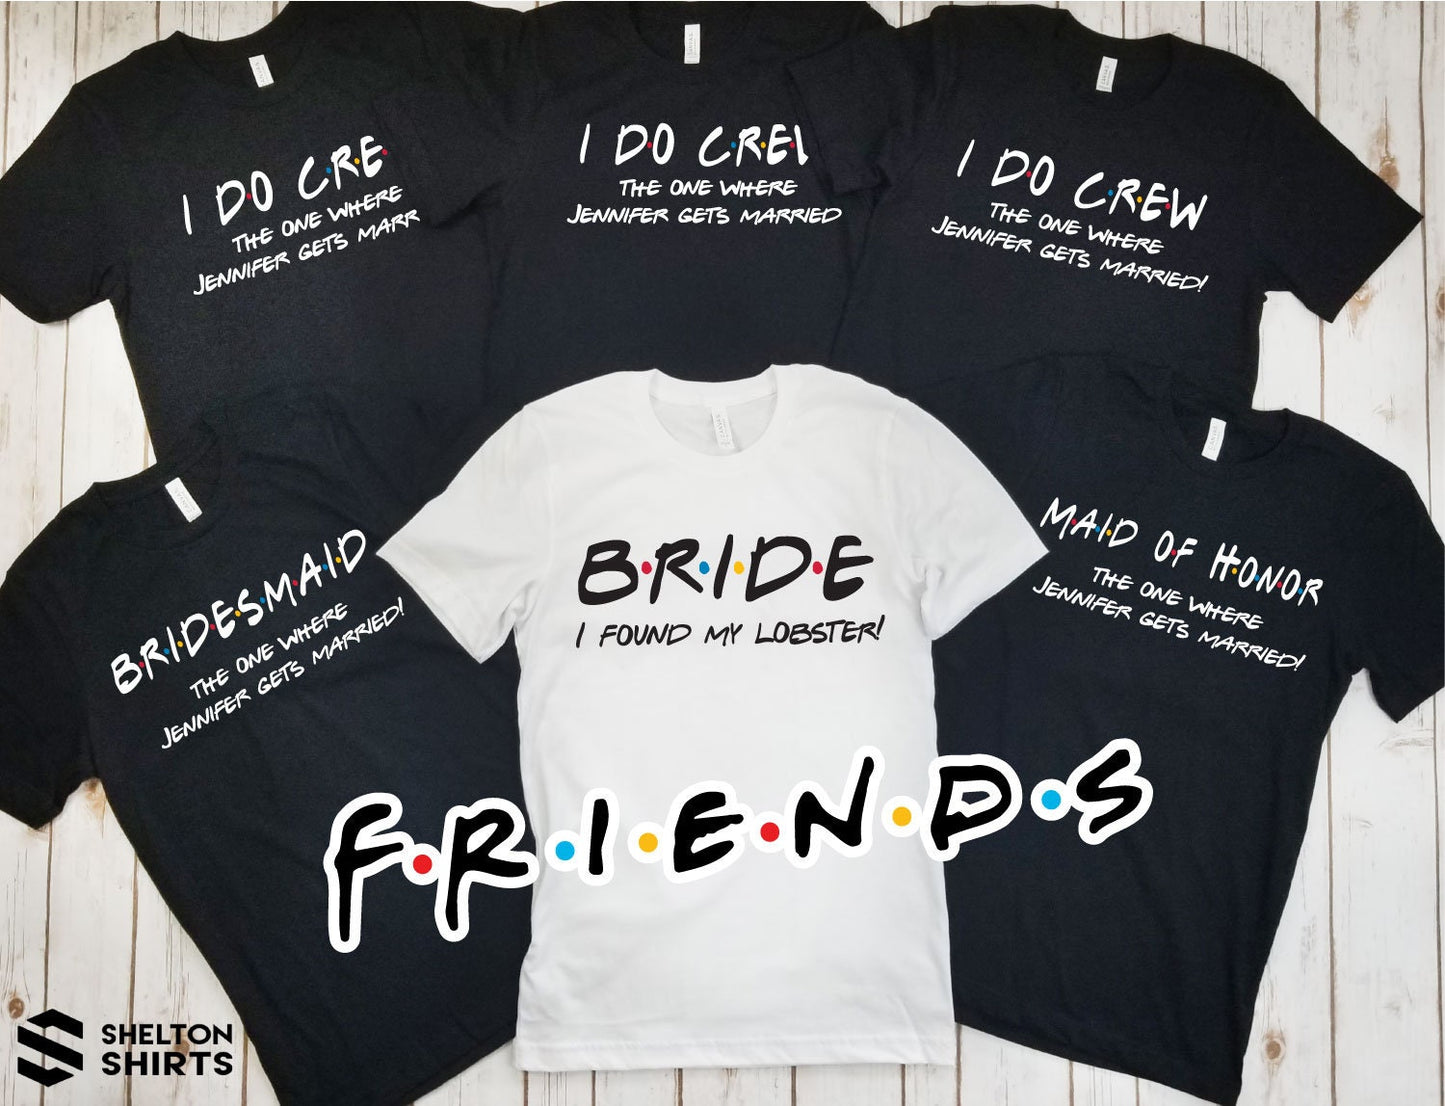 FRIENDS Bachelorette Party T-Shirts - Funny quotes and sayings from the TV show